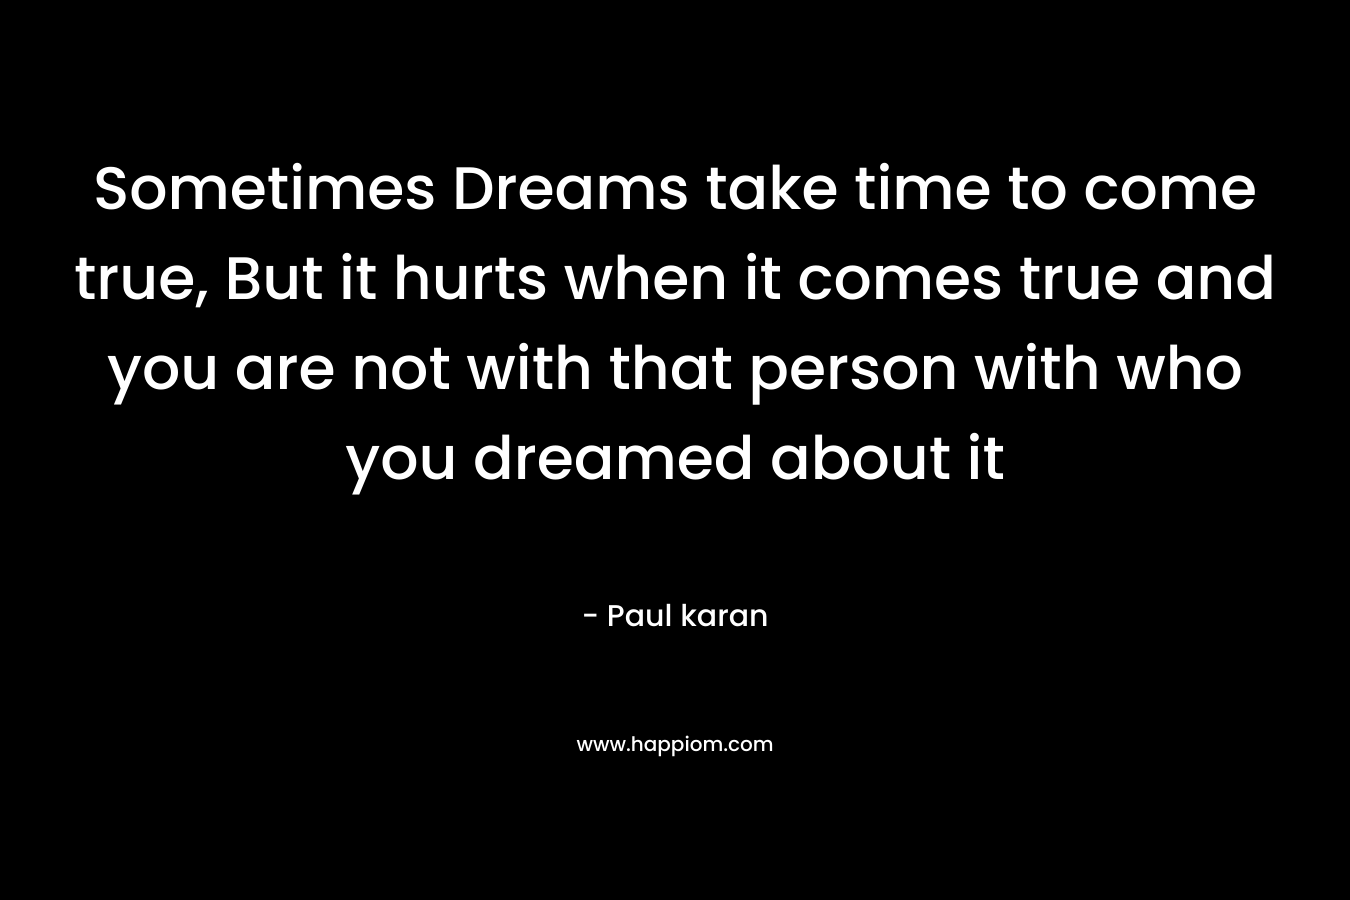 Sometimes Dreams take time to come true, But it hurts when it comes true and you are not with that person with who you dreamed about it – Paul karan